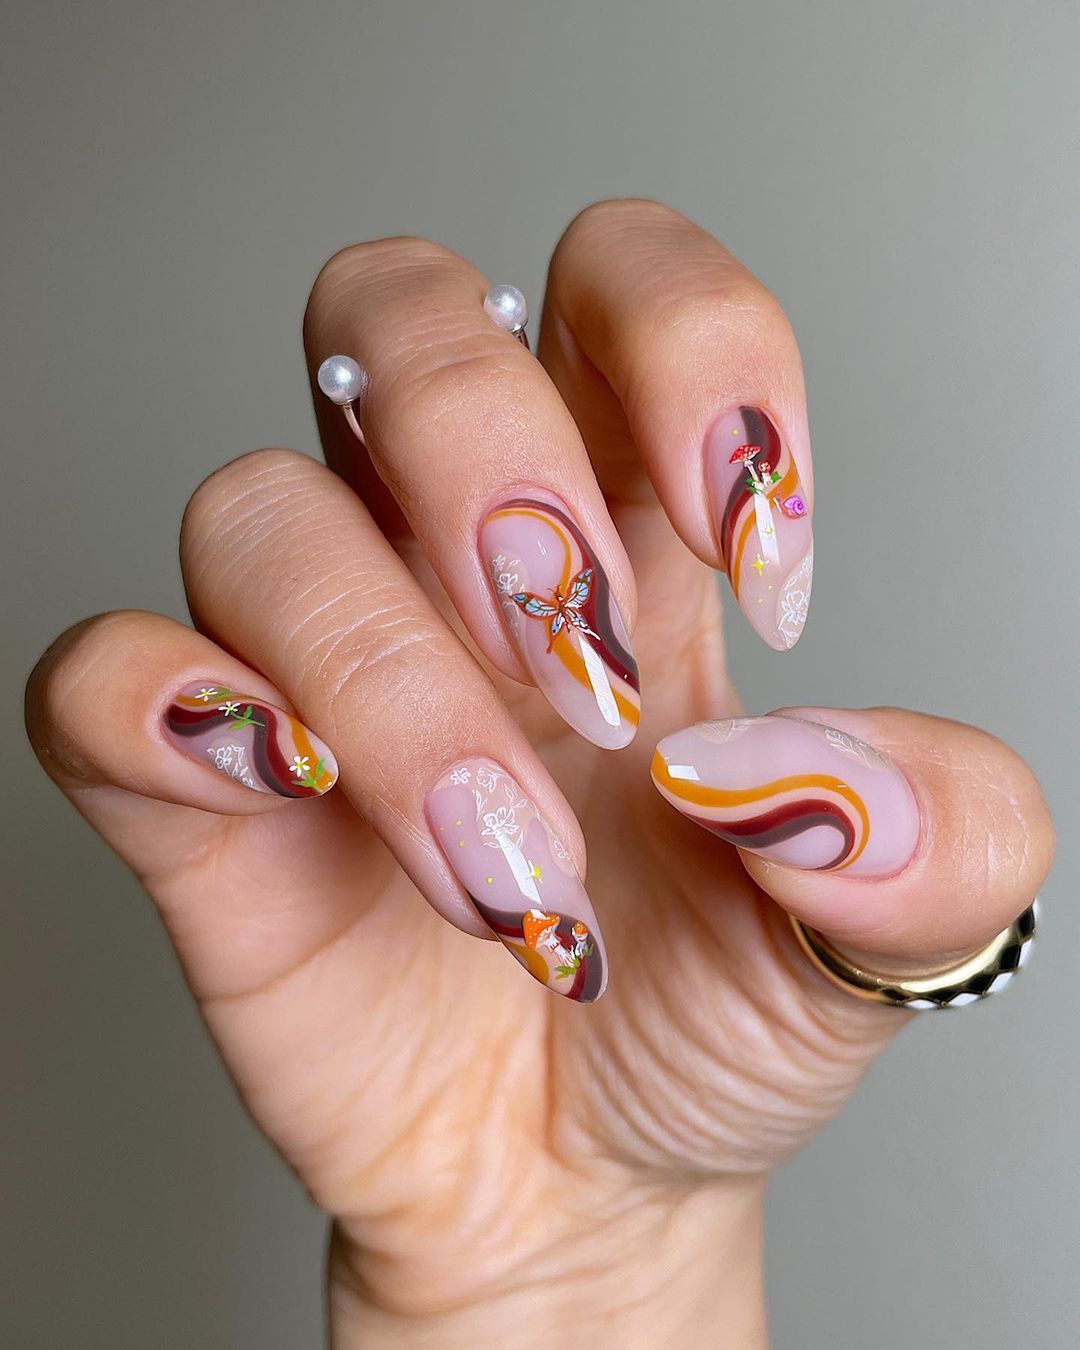 Acrylic Nails with Swirls and Butterfly Design